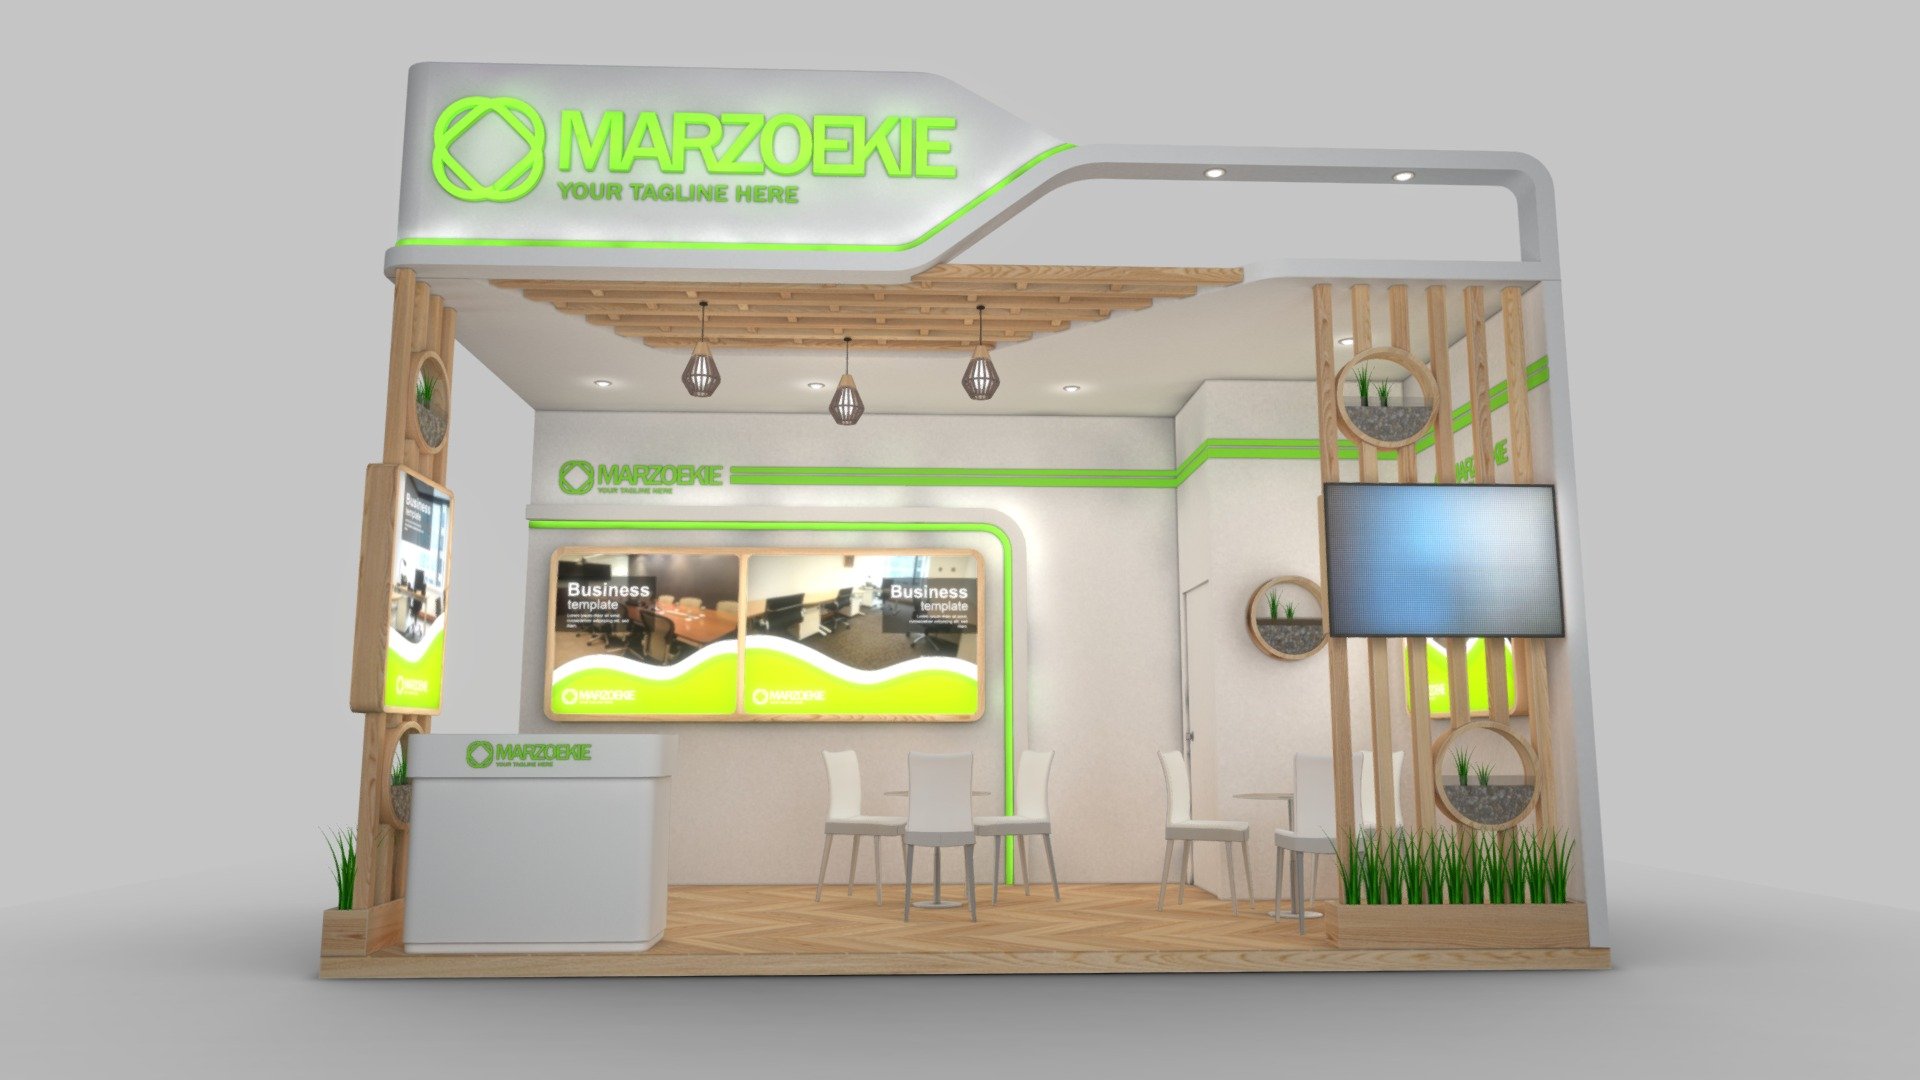 exhibition stand design 3D model
18sqm / 6x3m
2 Open side view
Unit:cm

Format:
1. Autodesk 3Ds max 2018 / V-ray 3.6 render
2. Autodesk 3Ds max 2015 / Default scanline render
3. Obj format (2)
4. Fbx format (2) - EXHIBITION STAND MRZ - Buy Royalty Free 3D model by fasih.lisan 3d model